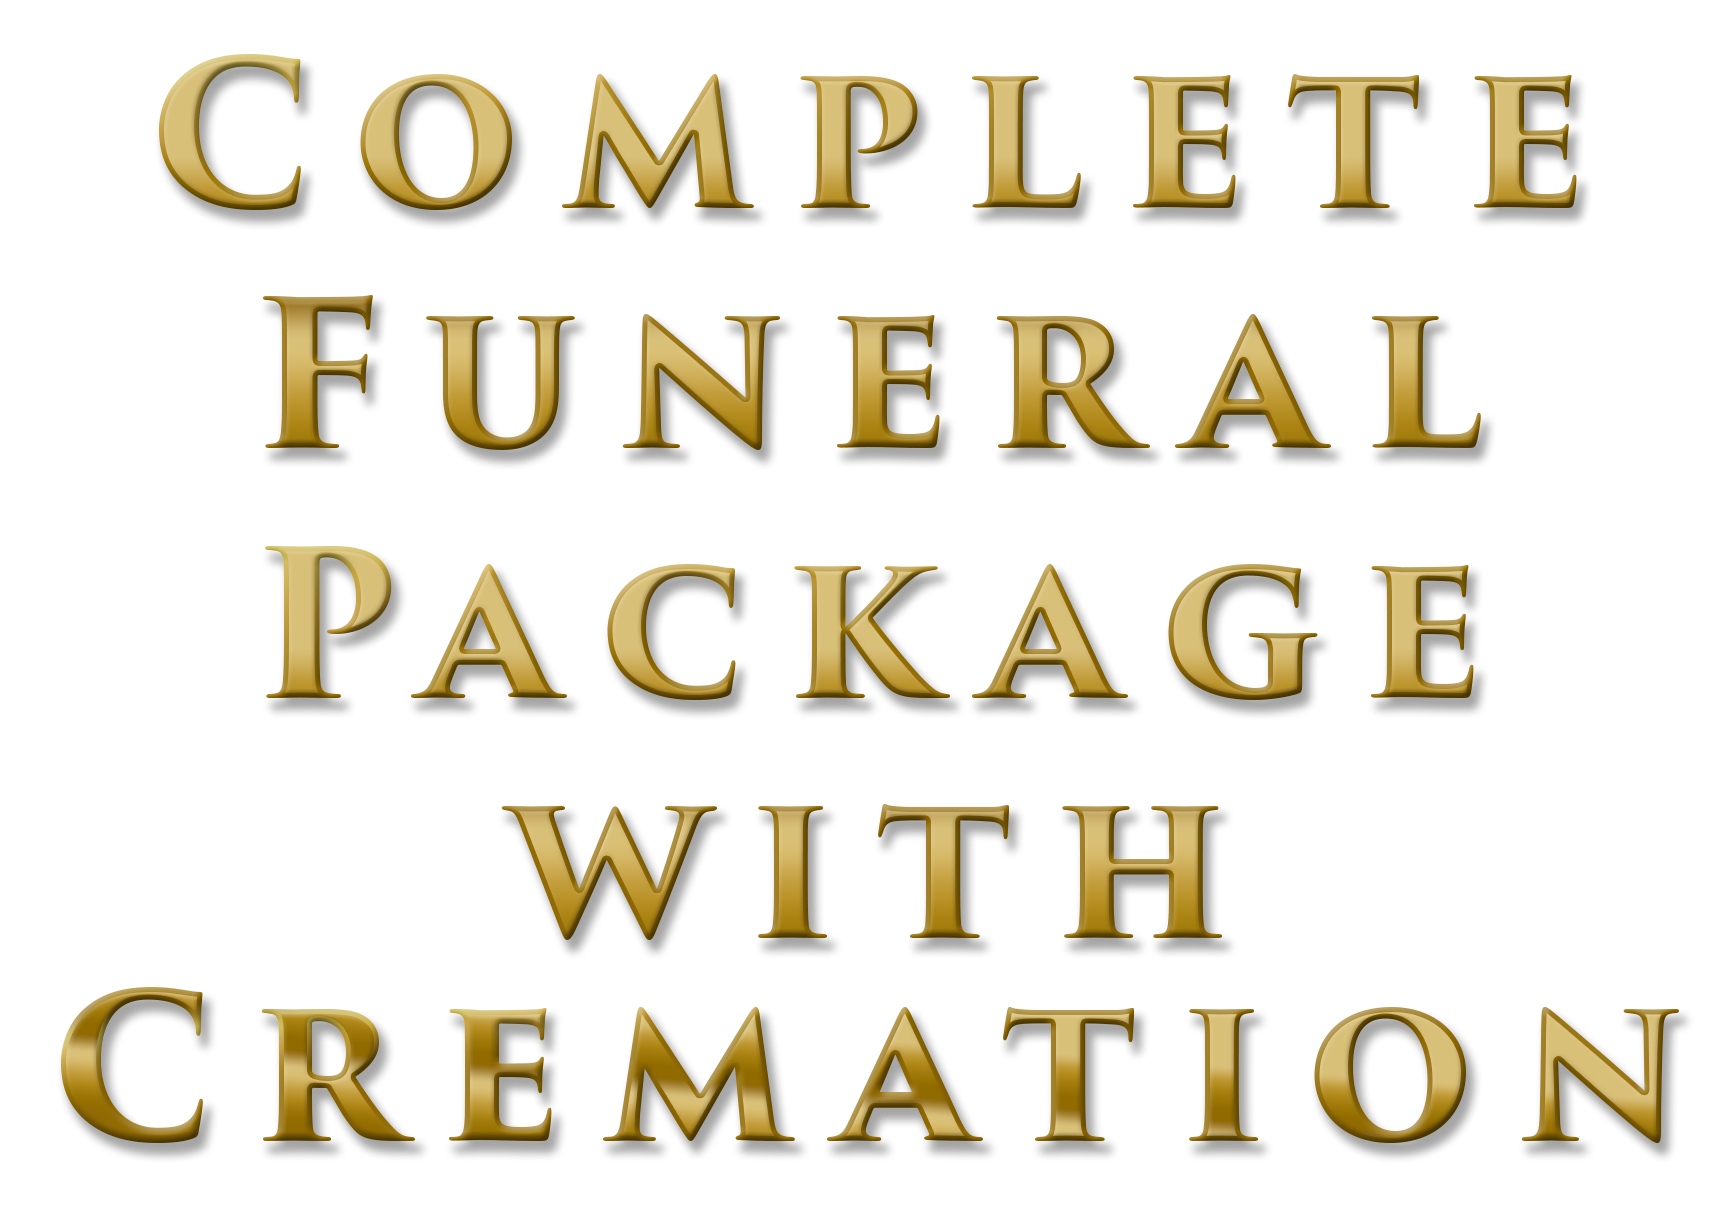 Complete Funeral Package with Cremation Option in Memphis, TN